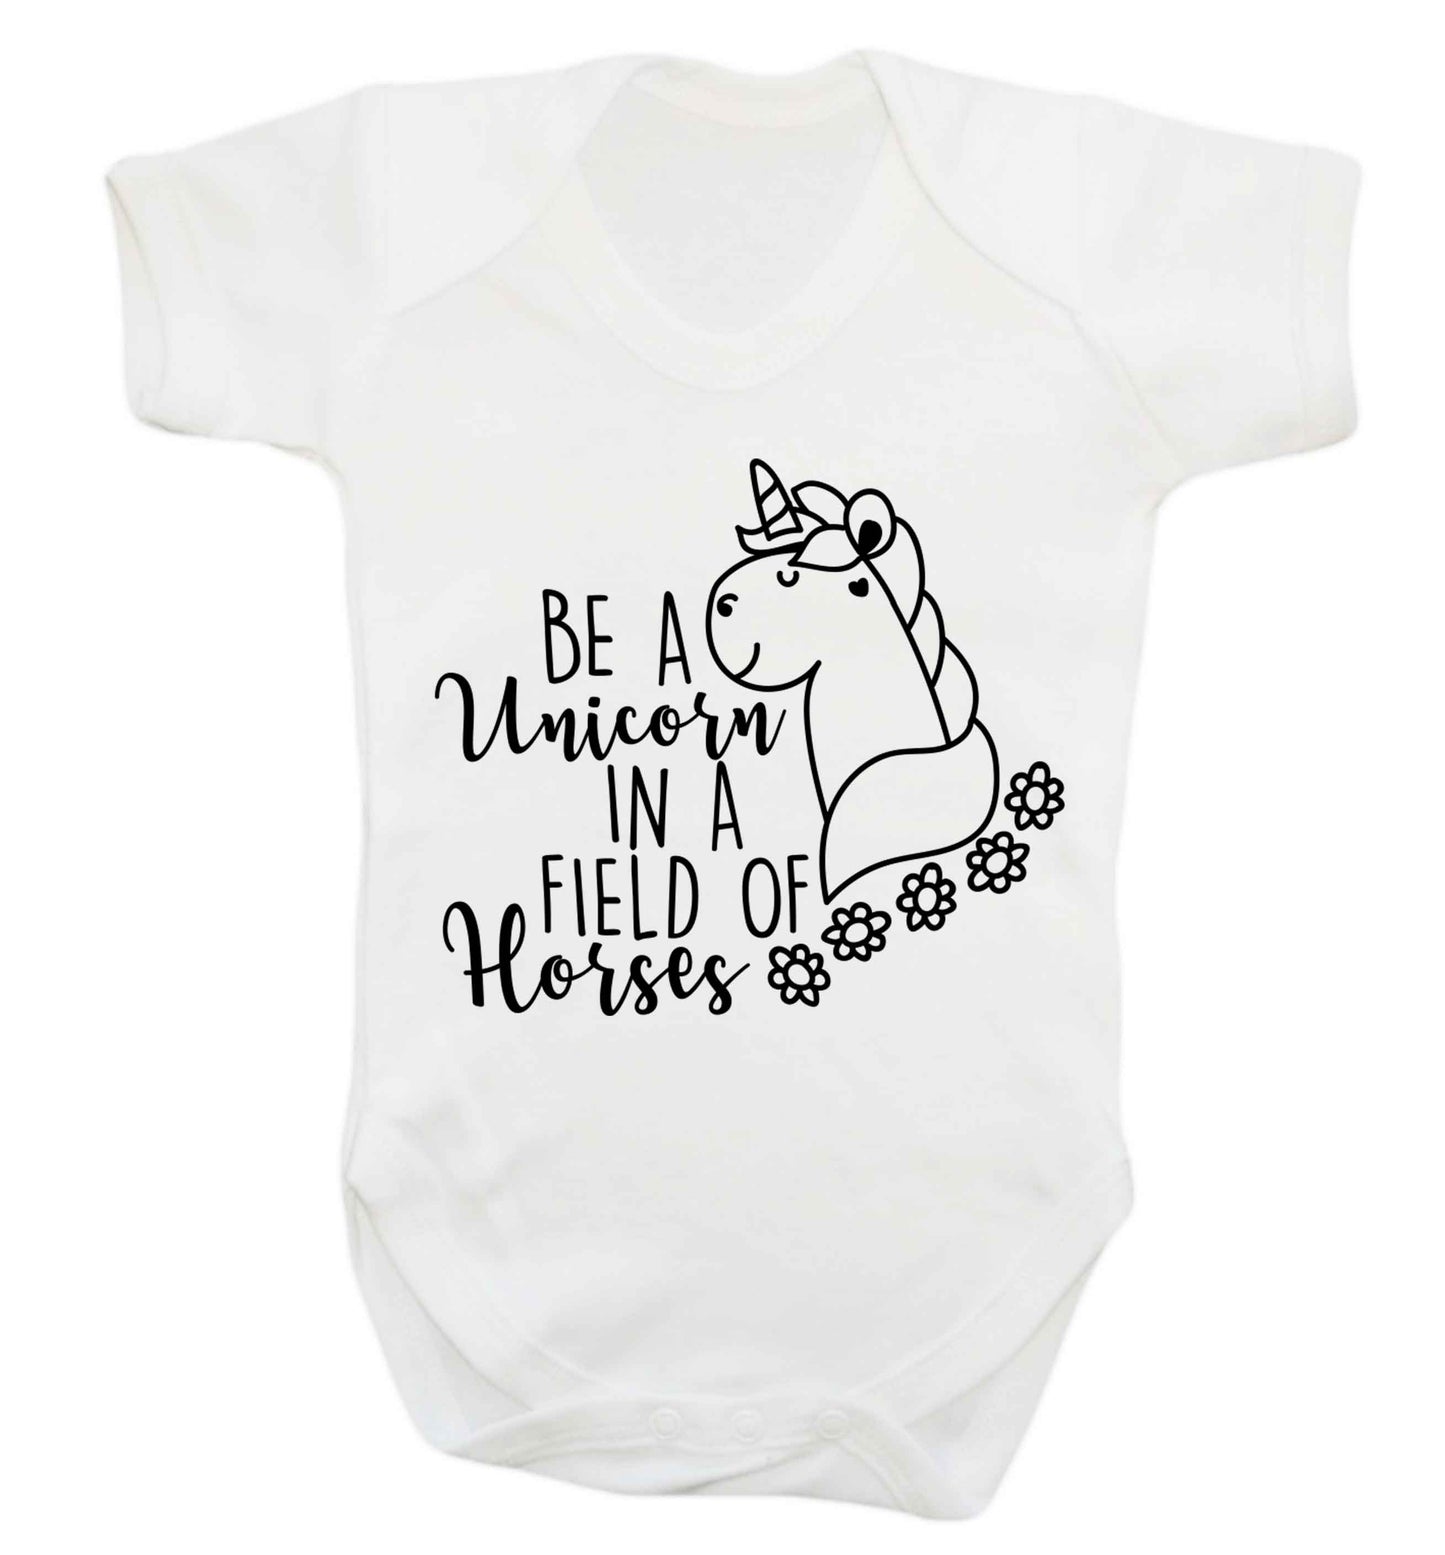 Be a unicorn in a field of horses Baby Vest white 18-24 months